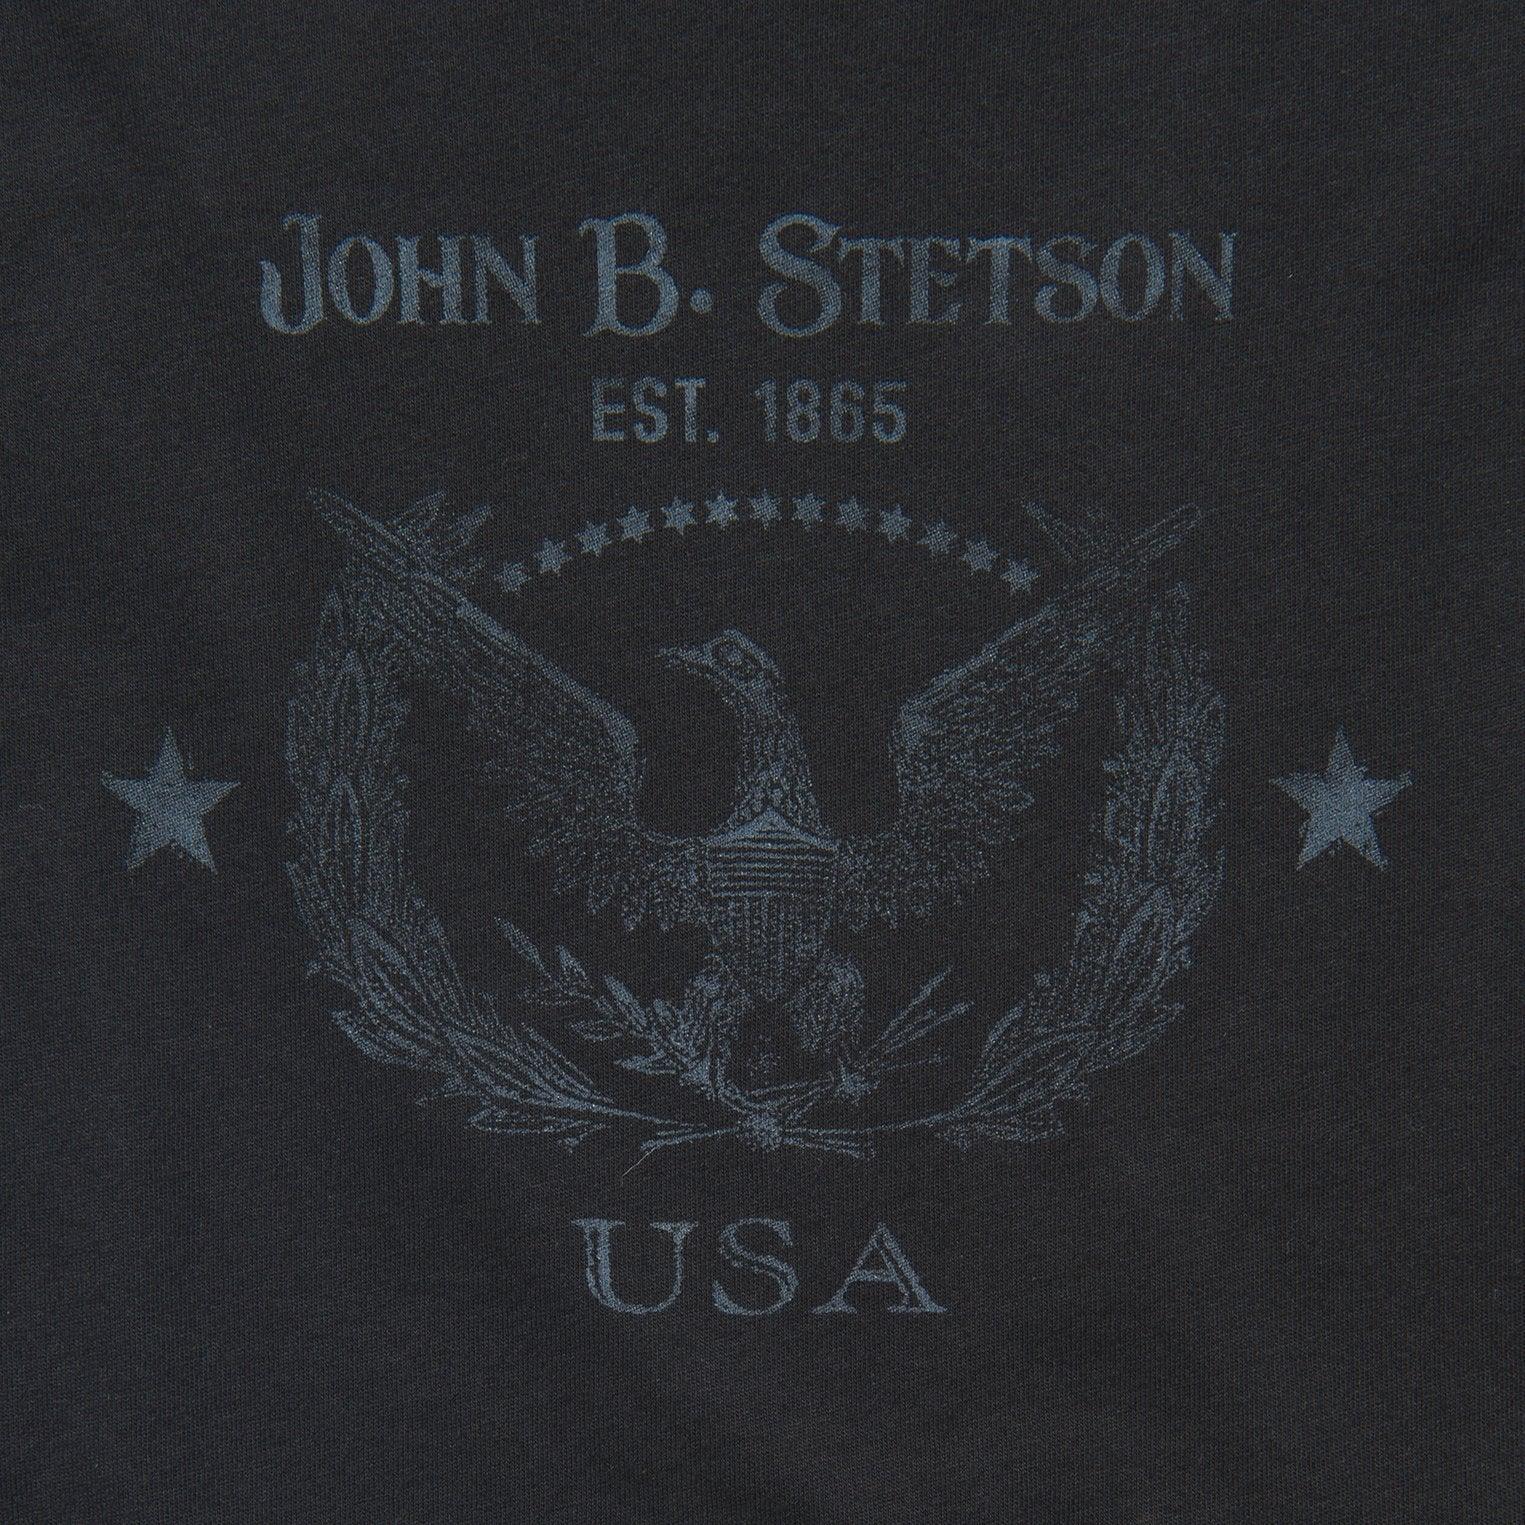 Stetson Black Eagle Graphic Tee - Flyclothing LLC